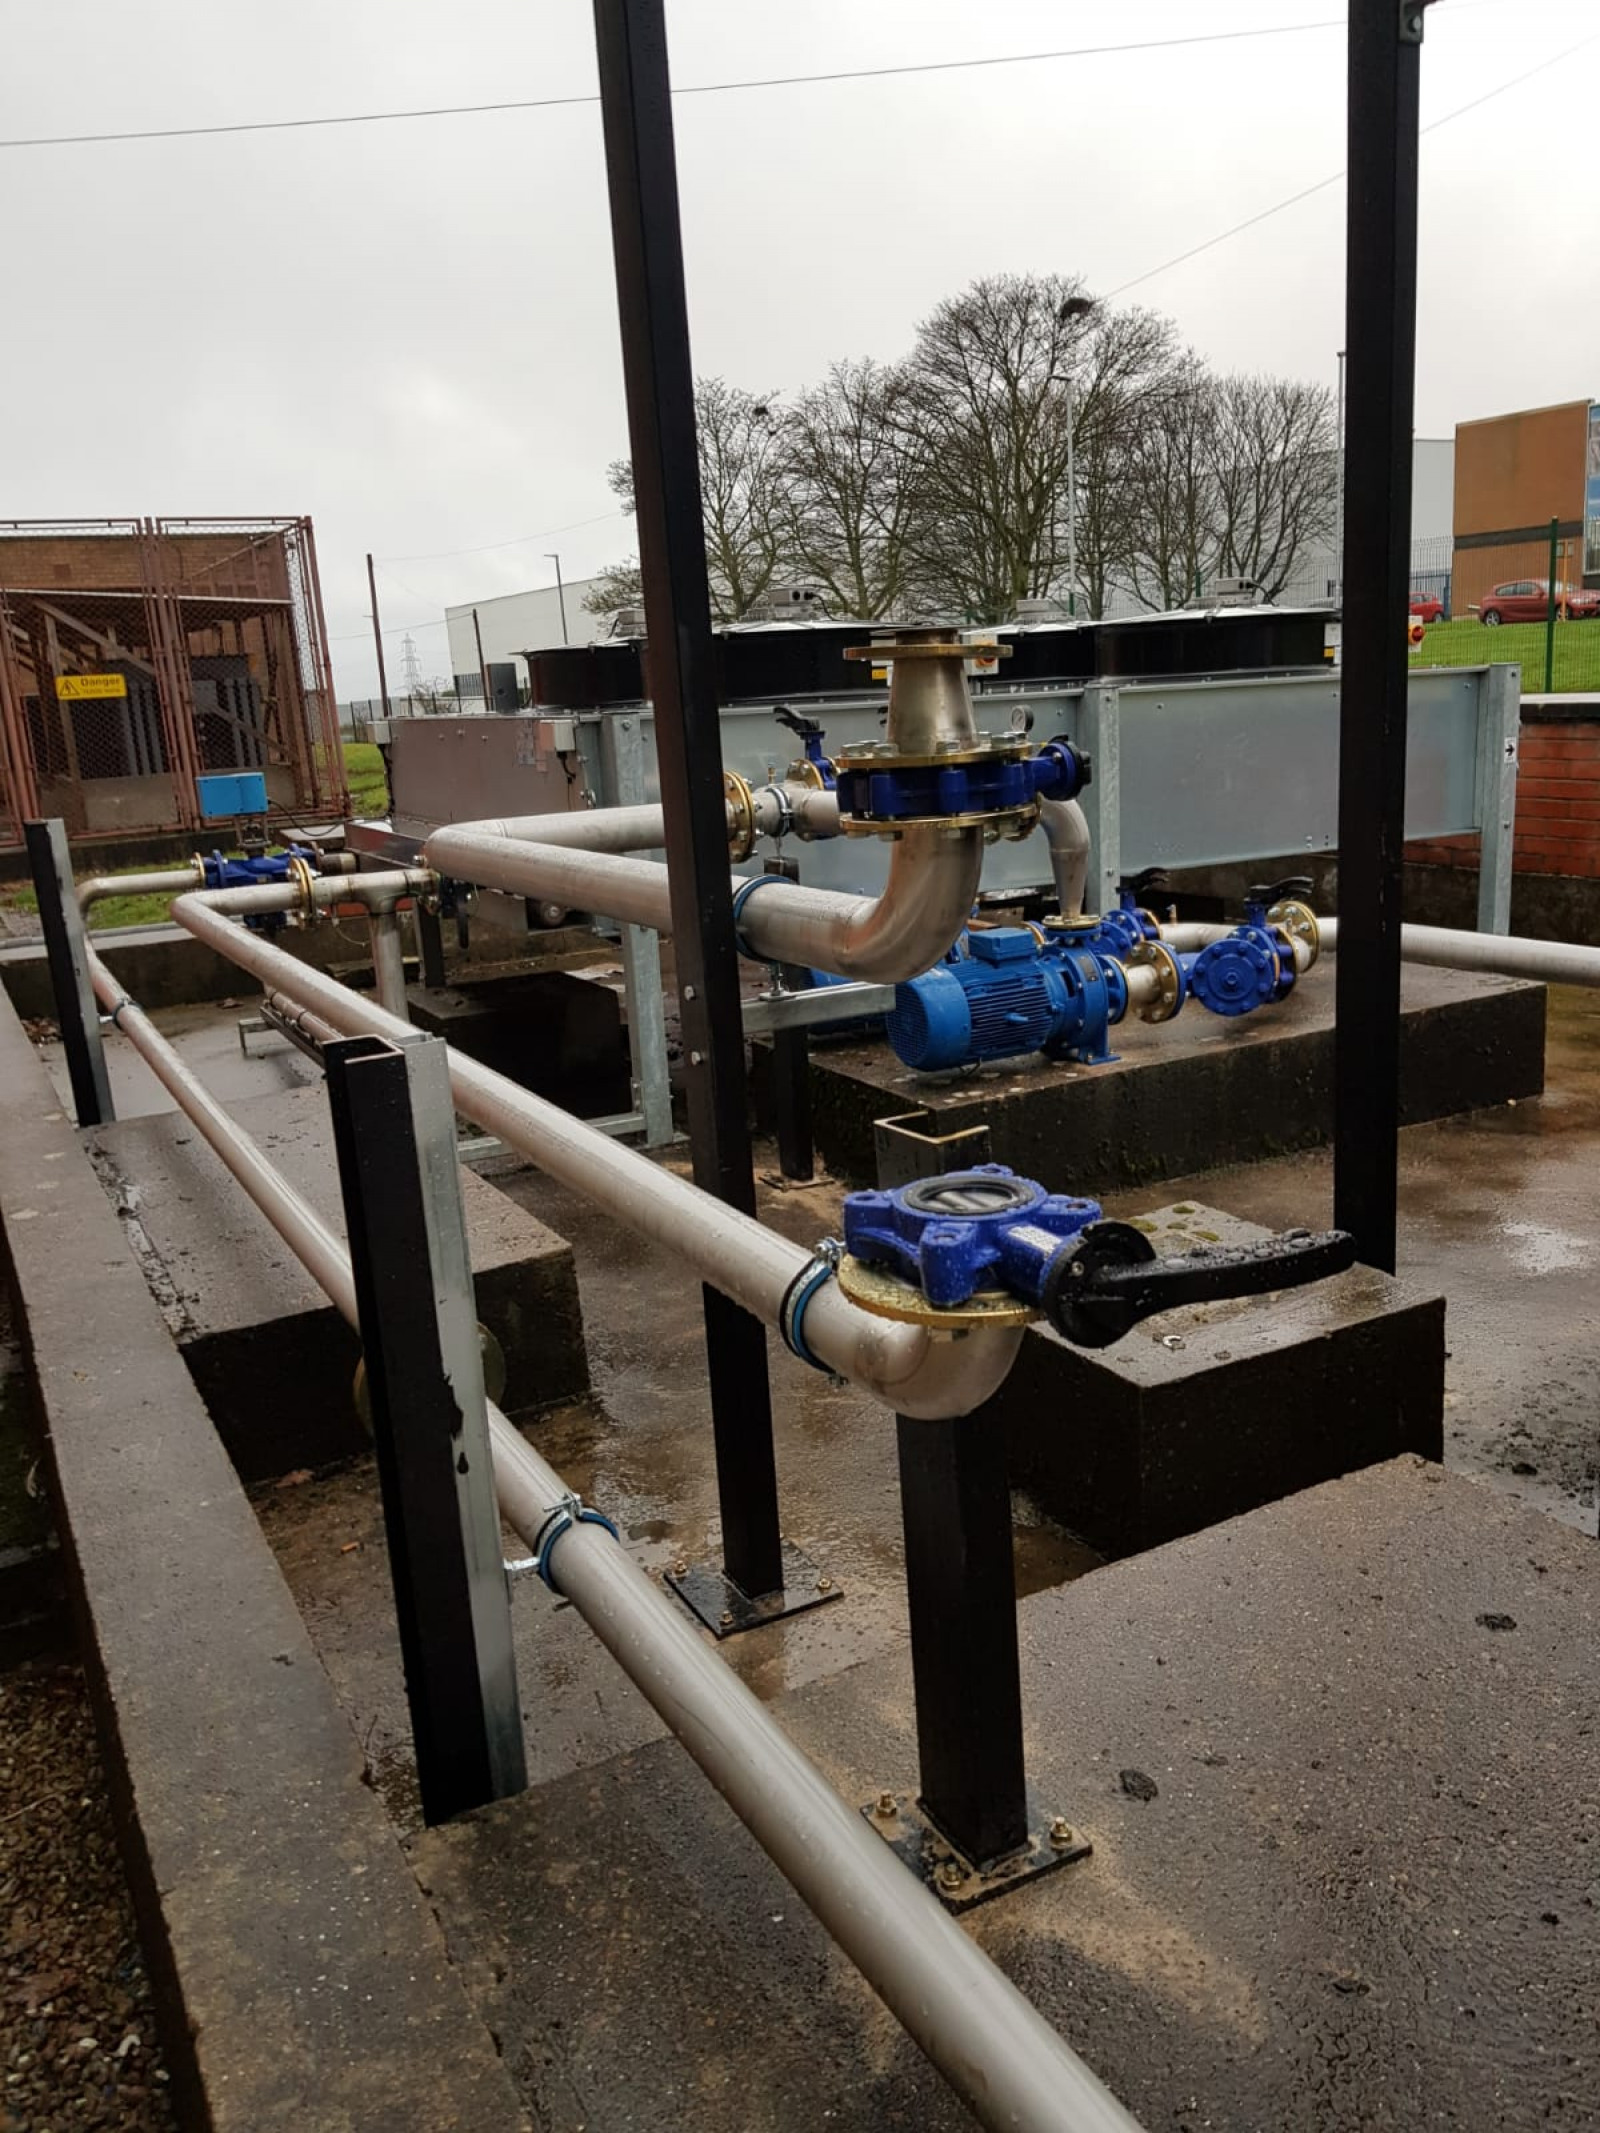 ENCO Ltd complete a chilled water install for a key client